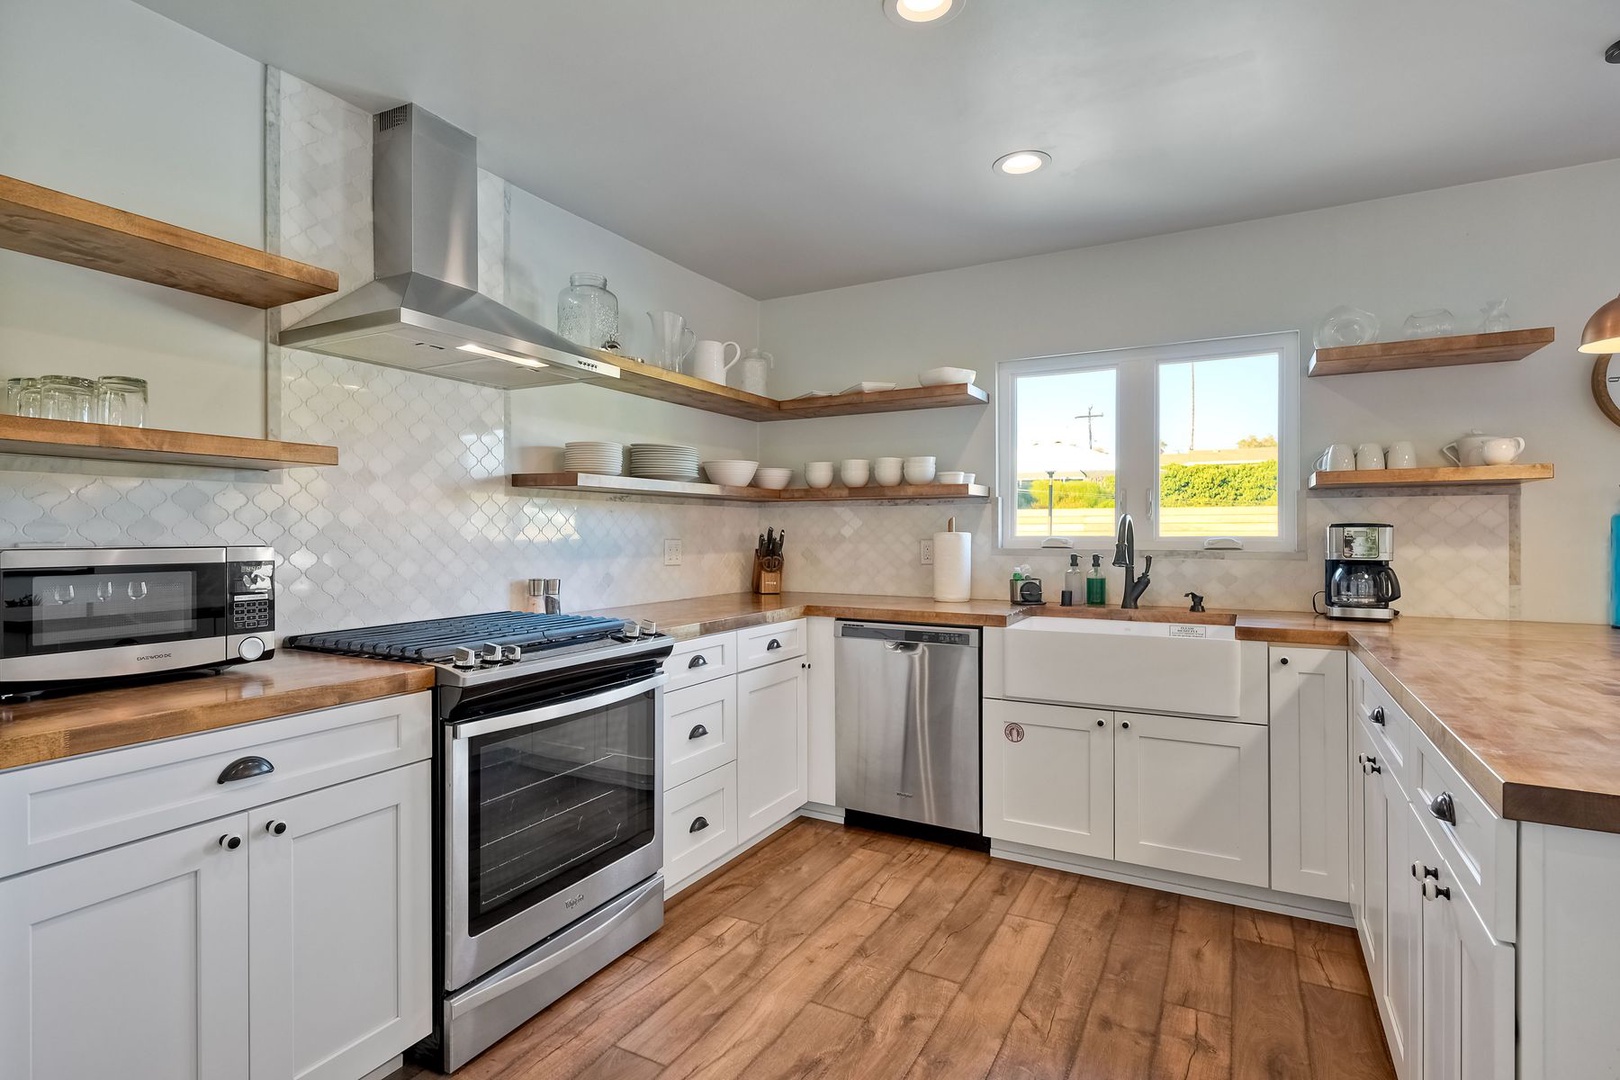 The airy kitchen is spacious & offers all the comforts of home